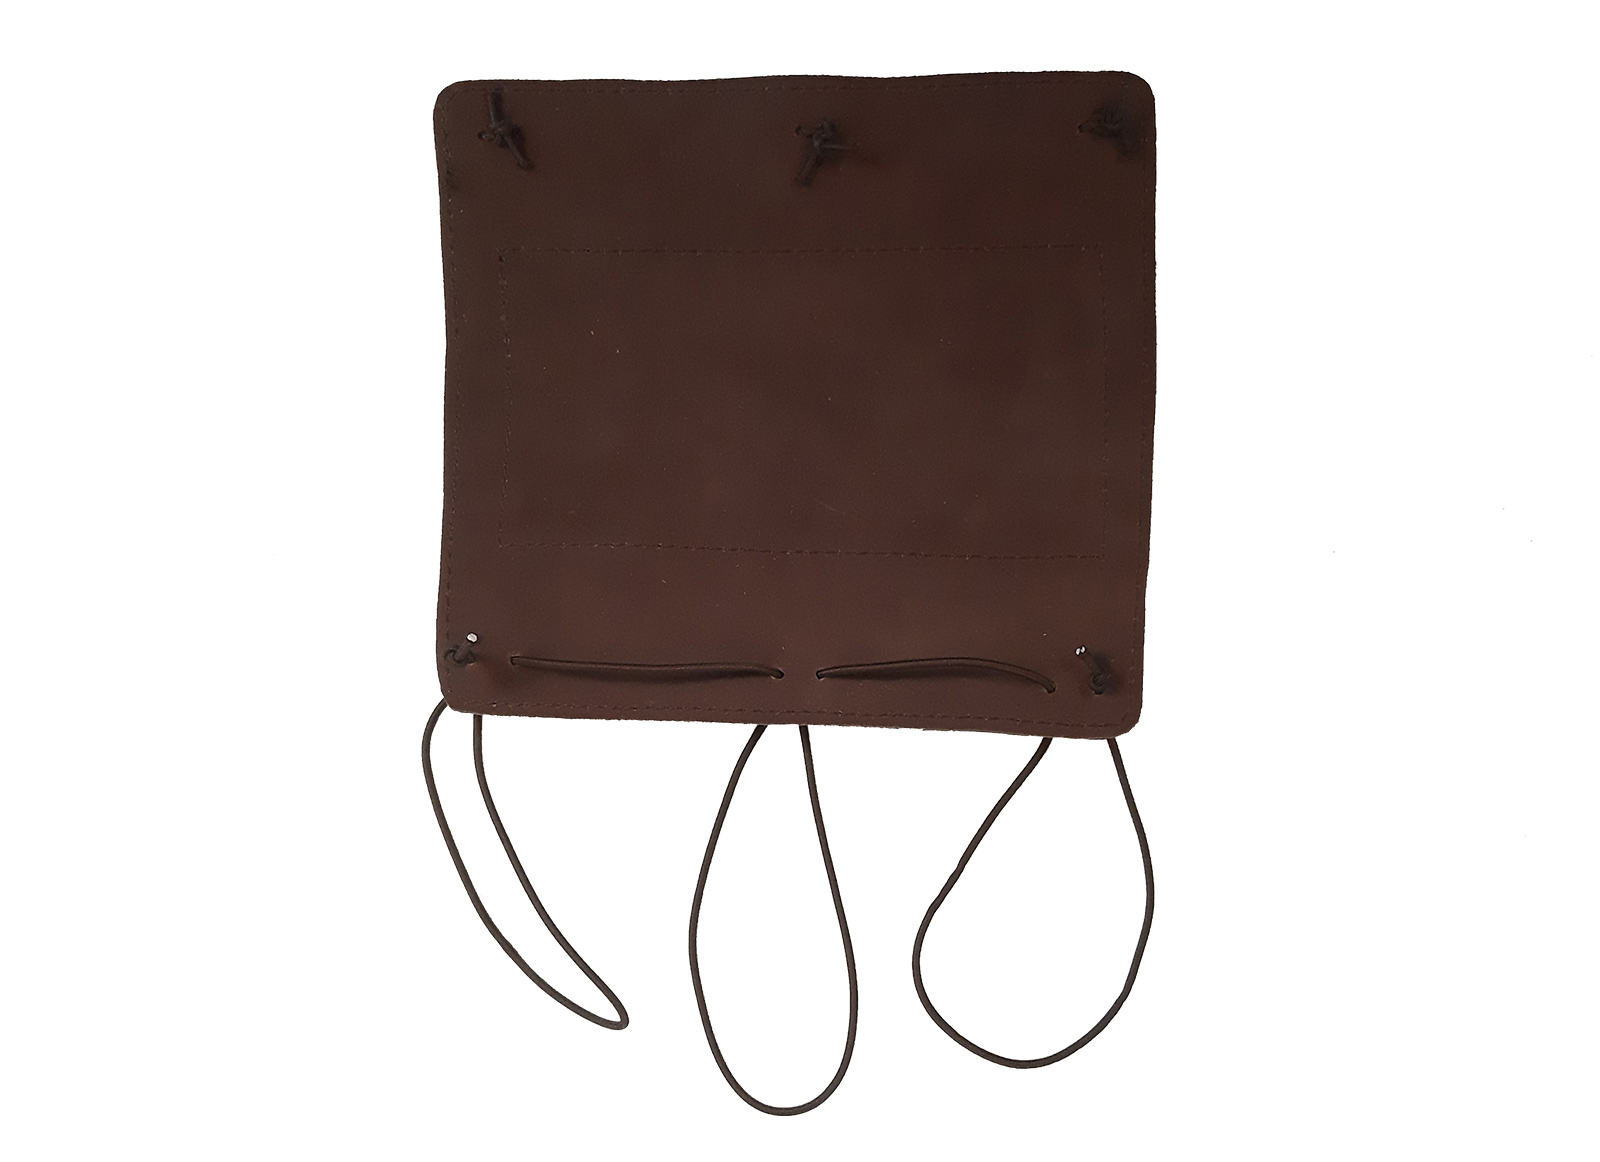 ALPEN ARCHERY TRADITIONAL ARMGUARD IN DARK BROWN LEATHER